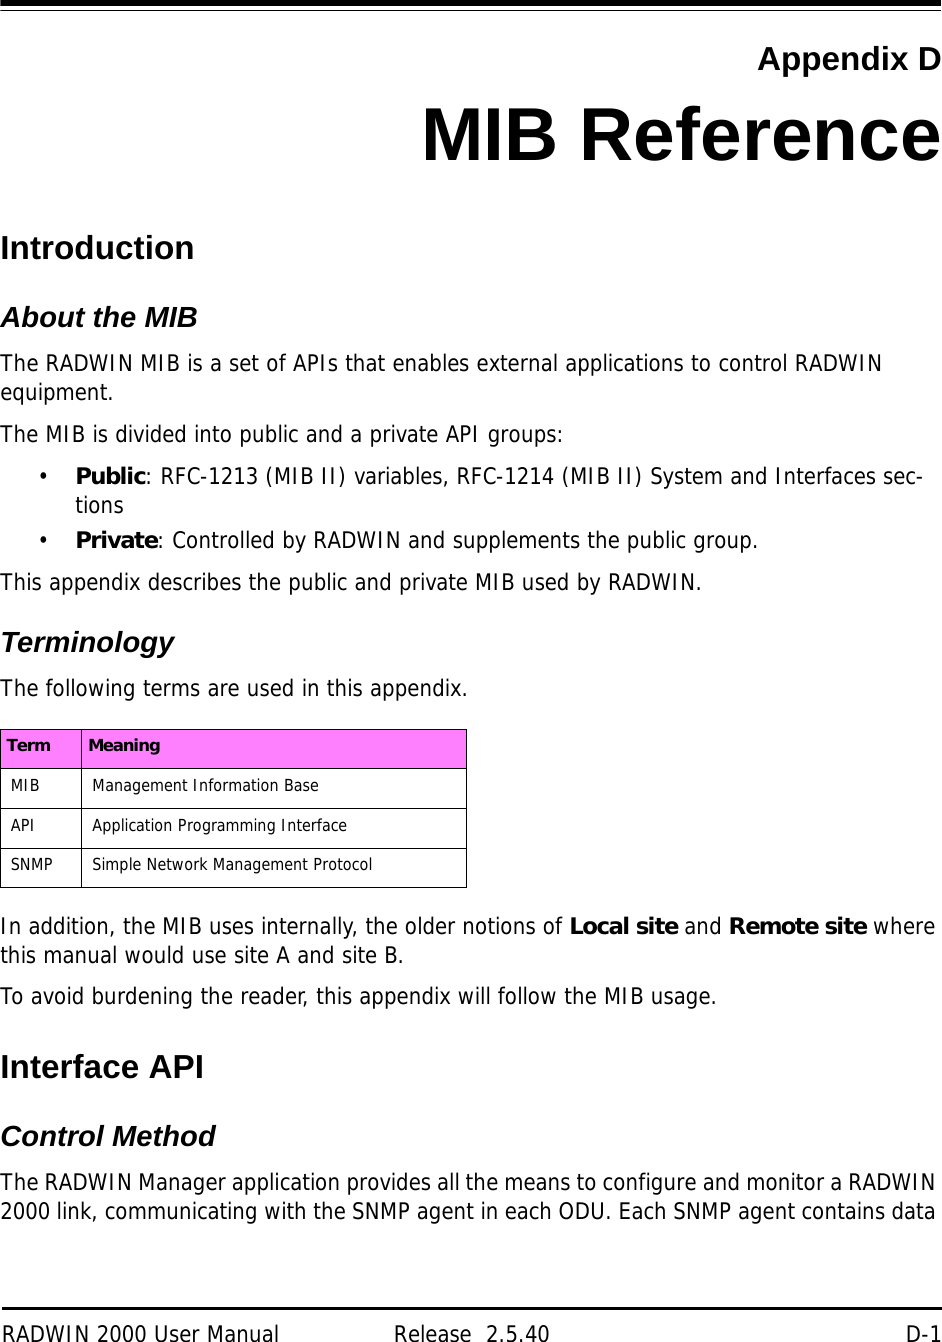 RADWIN 2000 User Manual Release  2.5.40 D-1Appendix DMIB ReferenceIntroductionAbout the MIBThe RADWIN MIB is a set of APIs that enables external applications to control RADWIN equipment.The MIB is divided into public and a private API groups:•Public: RFC-1213 (MIB II) variables, RFC-1214 (MIB II) System and Interfaces sec-tions•Private: Controlled by RADWIN and supplements the public group.This appendix describes the public and private MIB used by RADWIN.TerminologyThe following terms are used in this appendix.In addition, the MIB uses internally, the older notions of Local site and Remote site where this manual would use site A and site B.To avoid burdening the reader, this appendix will follow the MIB usage.Interface APIControl MethodThe RADWIN Manager application provides all the means to configure and monitor a RADWIN 2000 link, communicating with the SNMP agent in each ODU. Each SNMP agent contains data Term MeaningMIB Management Information BaseAPI Application Programming InterfaceSNMP Simple Network Management Protocol